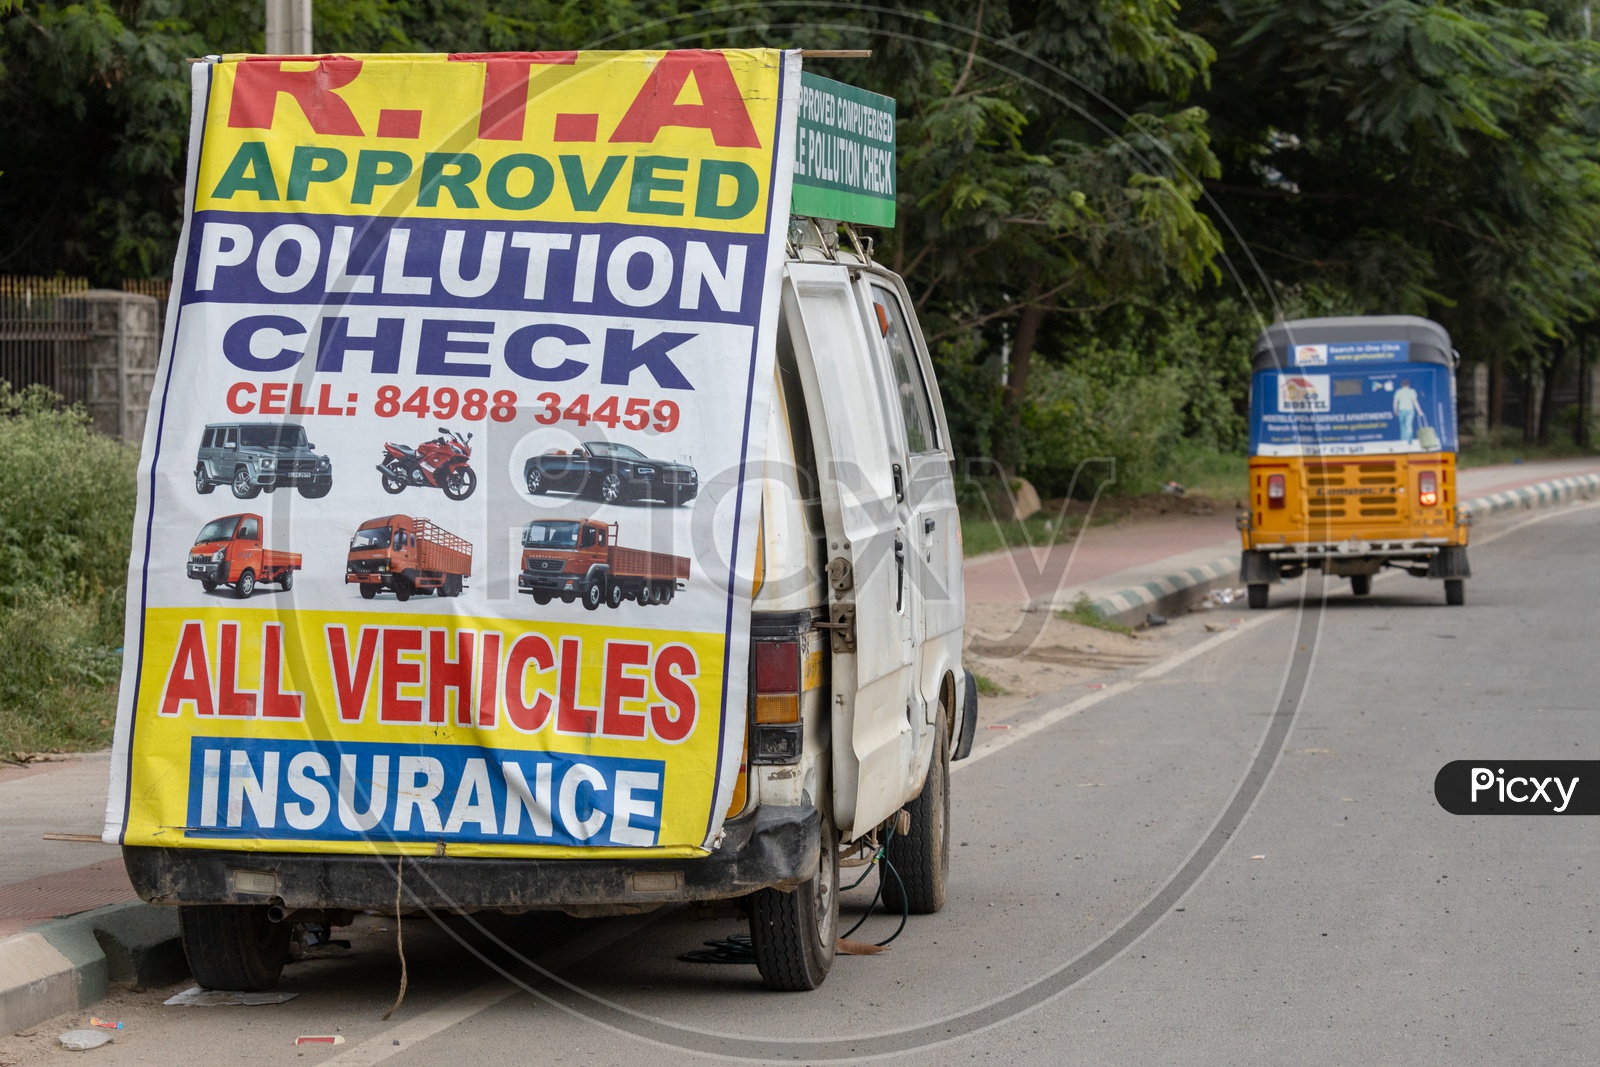 Pollution Check Vehicle.